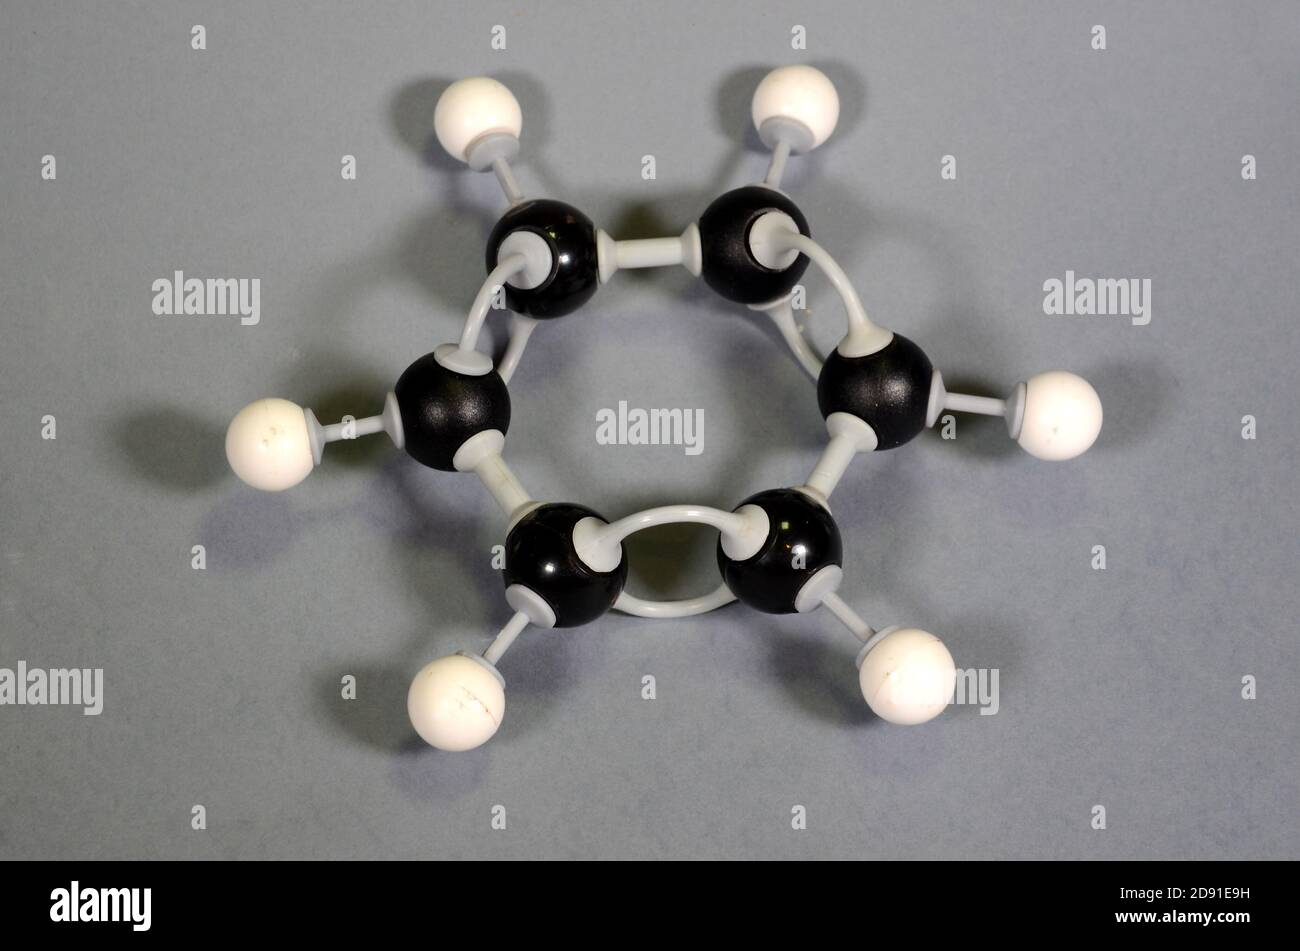 Molecule model of traditional benzene ring Stock Photo